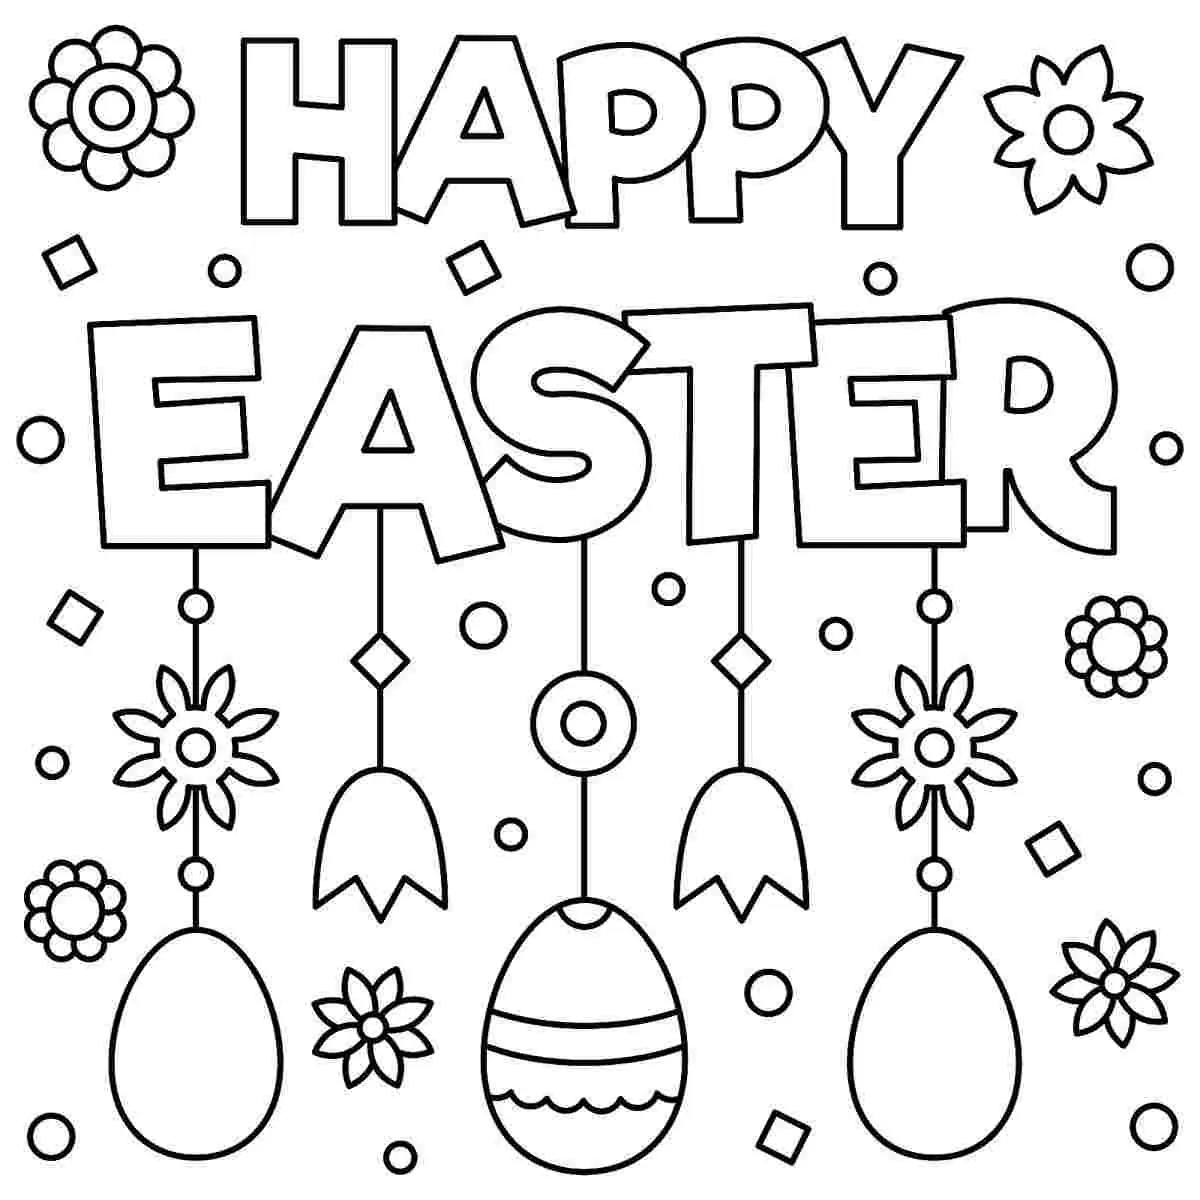 printable-easter-coloring-pages-for-kids-and-adults-oh-la-de